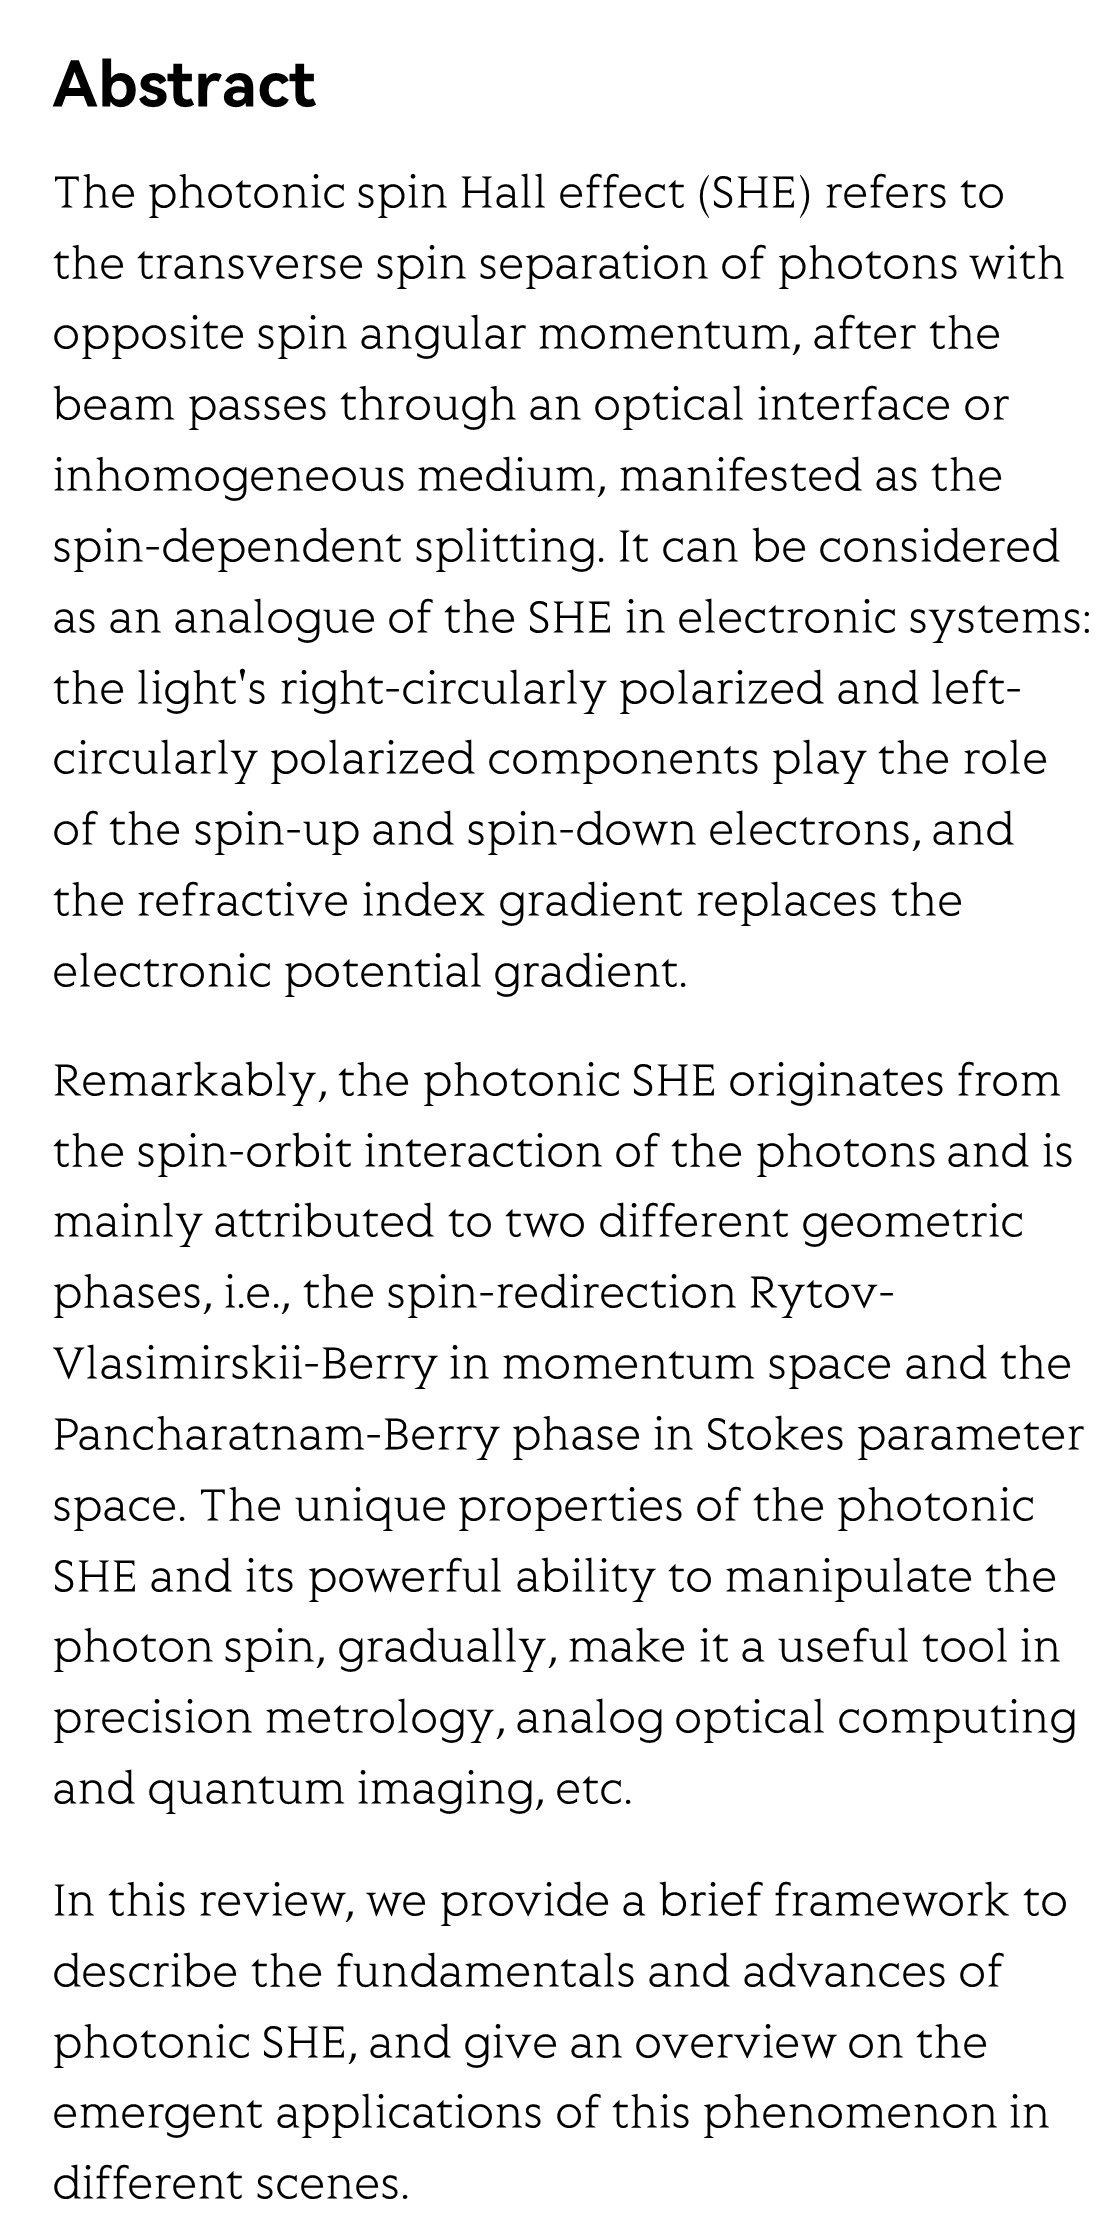 Photonic spin Hall effect: fundamentals and emergent applications_2